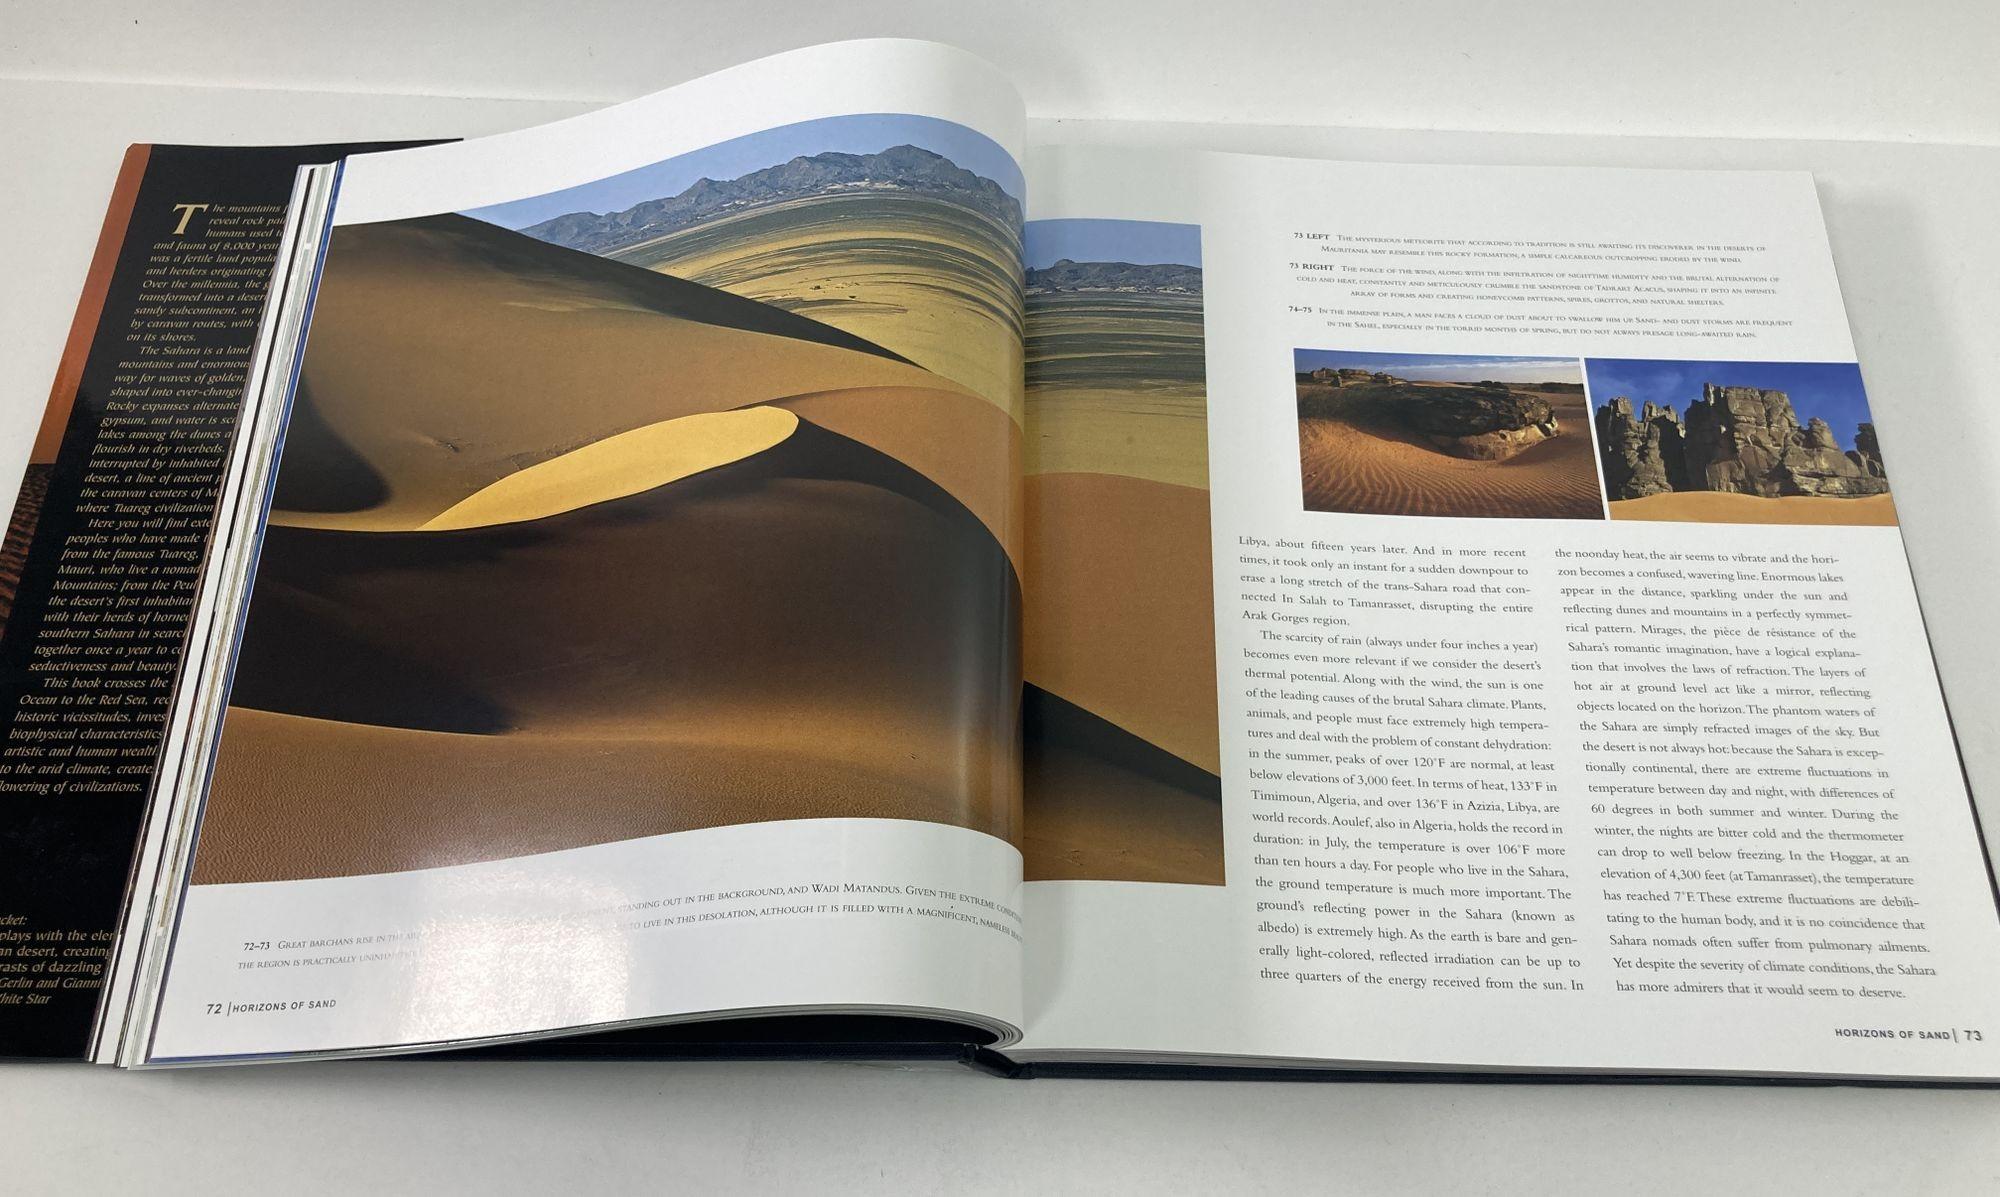 Sahara, an Immense Ocean of Sand by Paolo Novaresio, Gianni Guadalupi Hardcover For Sale 5